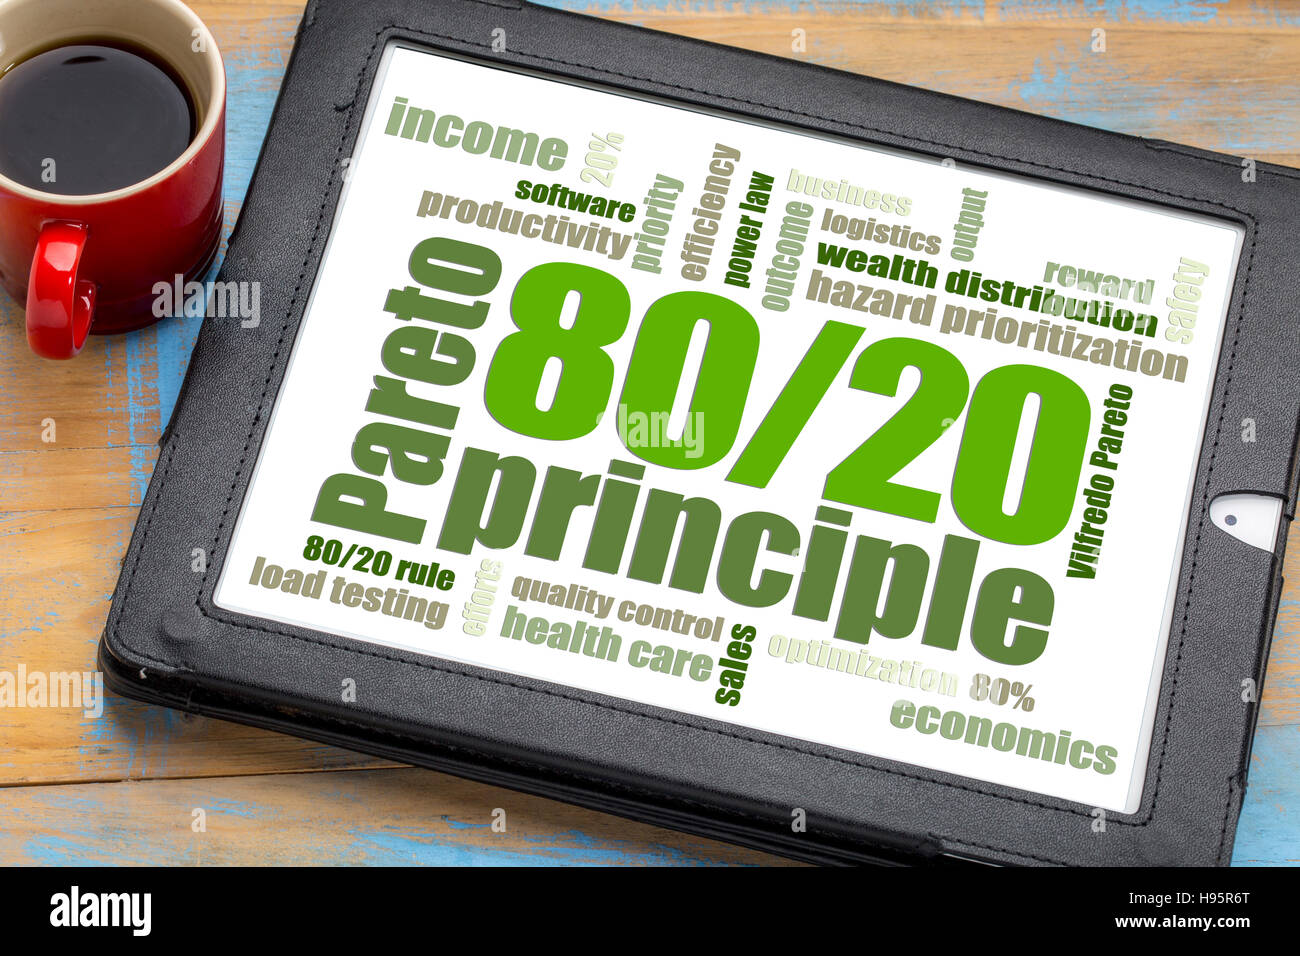 Pareto principle or eighty-twenty rule - word cloud on a digital tablet with a cup of coffee Stock Photo